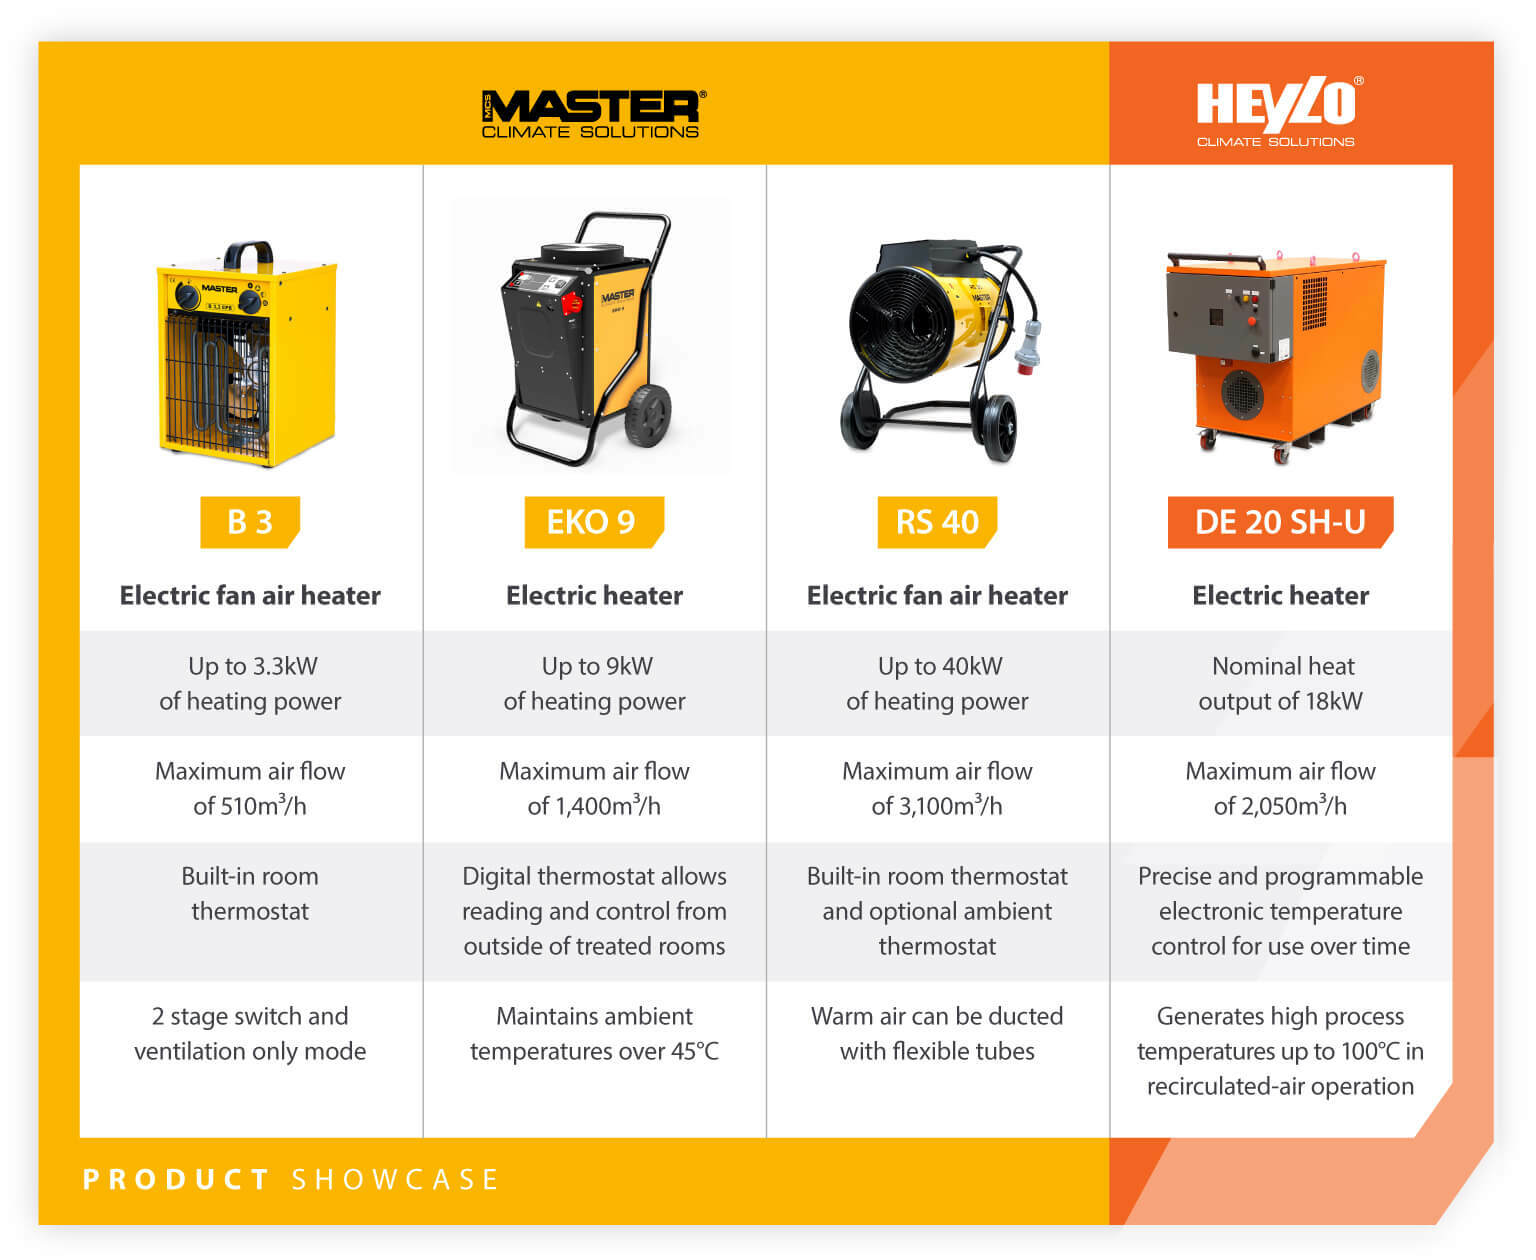 Product showcase comparing 4 commercial electric heater models and features